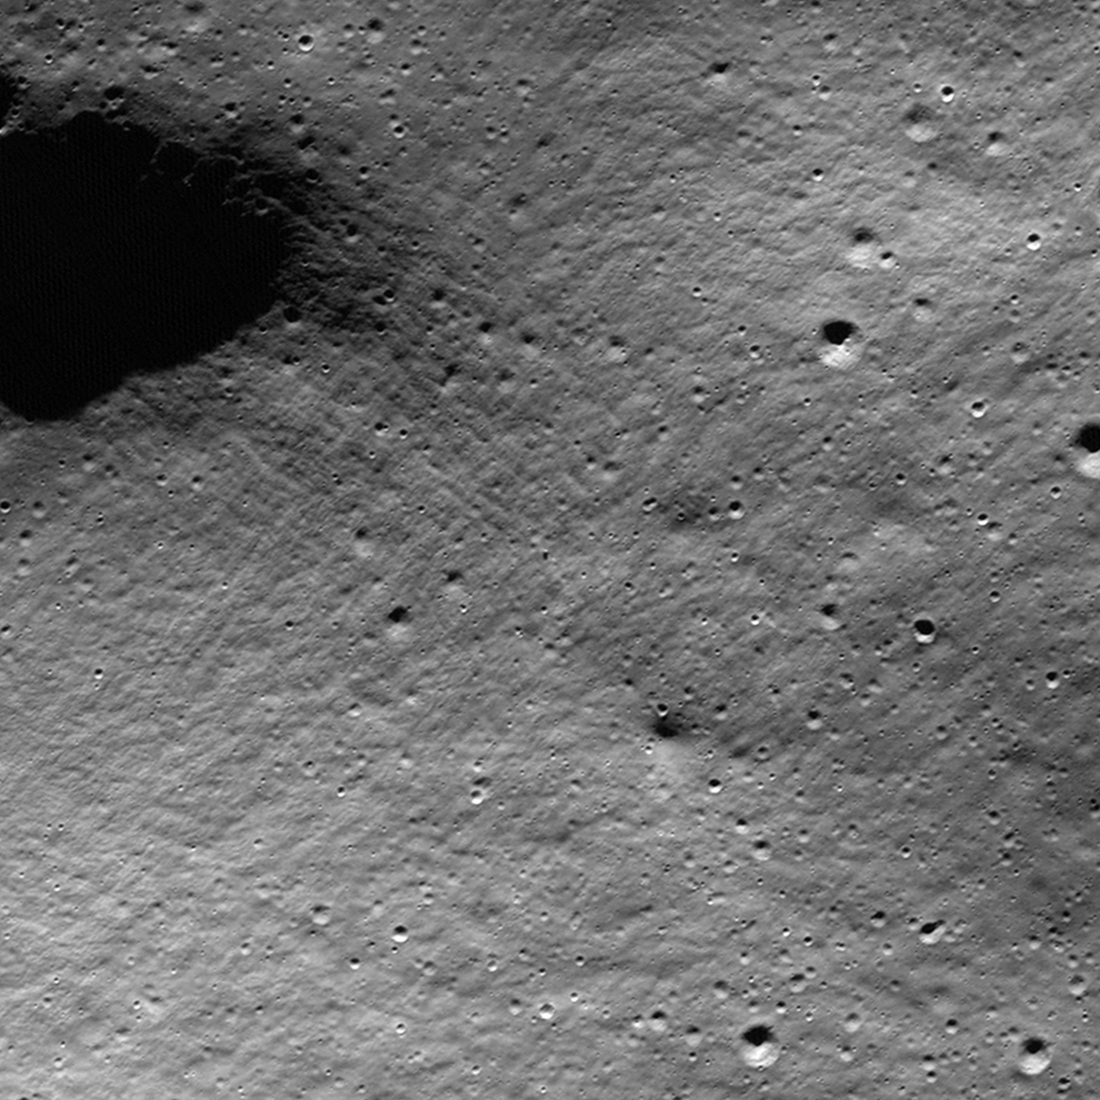 Animation captured by the Lunar Reconnaissance Orbiter showing the Odysseus lander's location on the Moon.